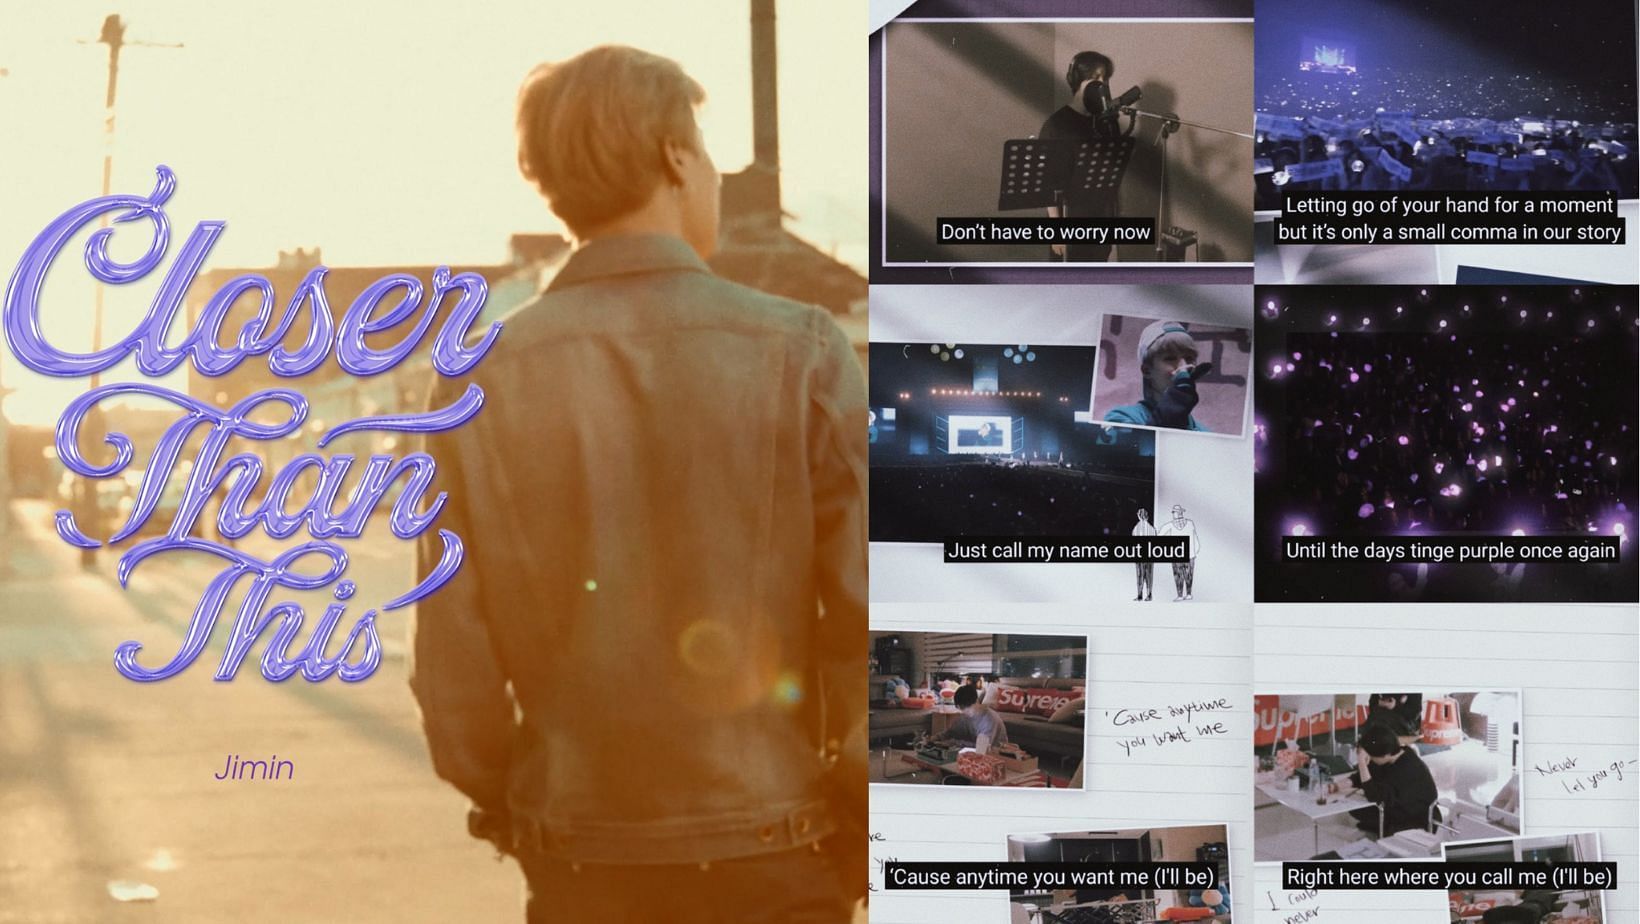 &lsquo;Closer Than This&rsquo; marks the end of &ldquo;#ThisIsJimin&rdquo; content presented over the past 3 months. (Images via X/@BIGHIT_MUSIC &amp; @taebokkiii)